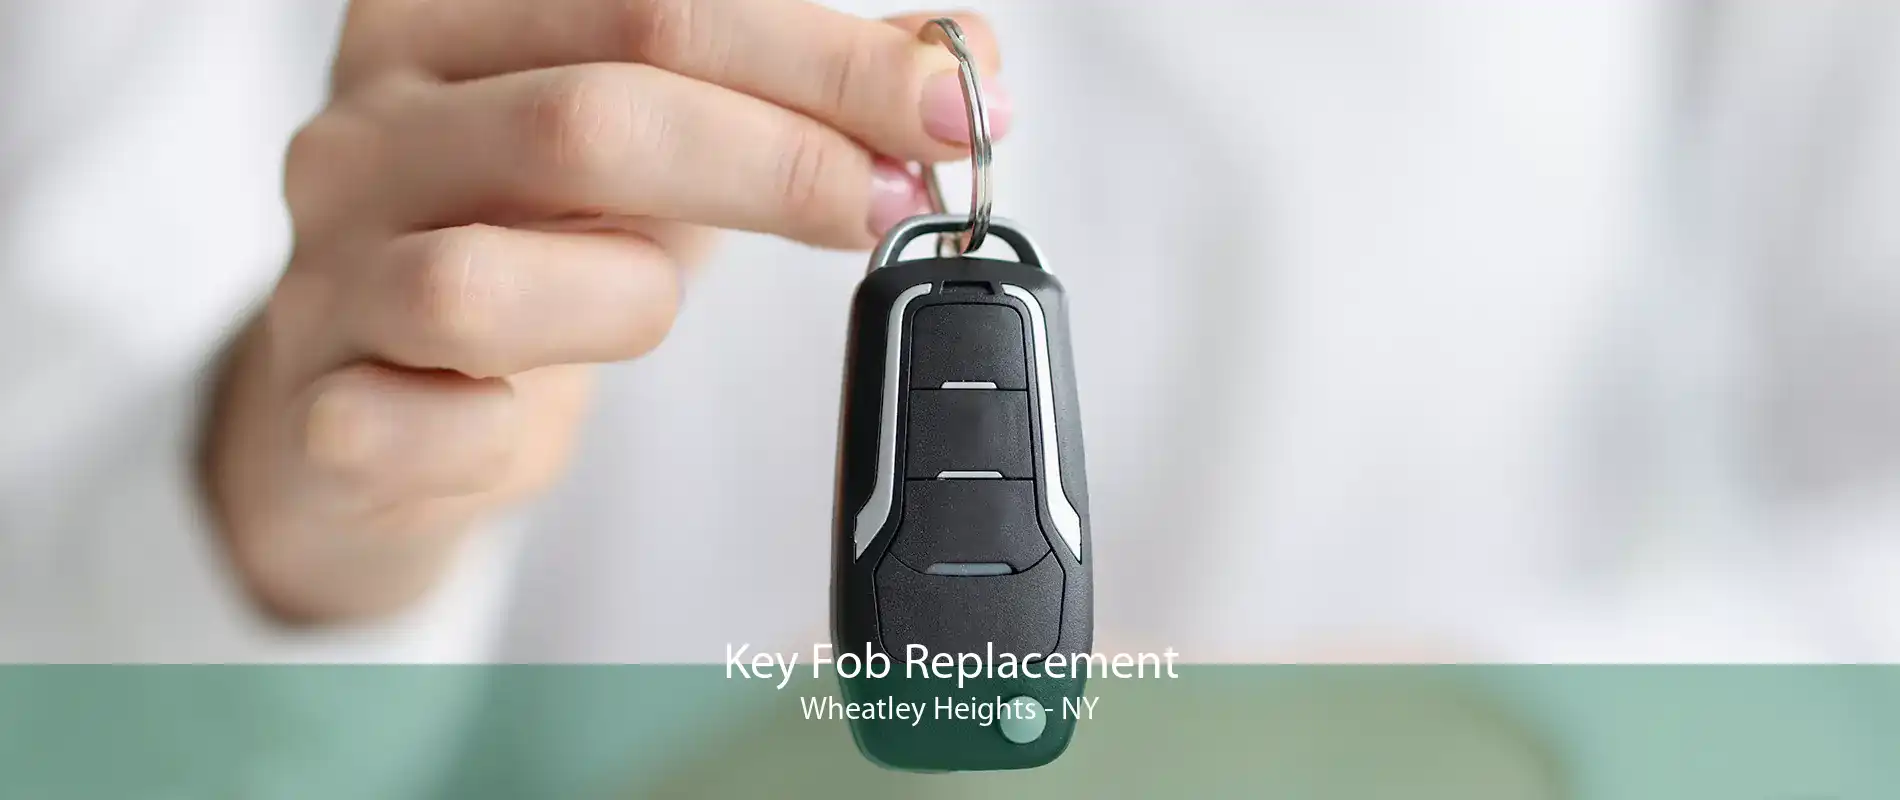 Key Fob Replacement Wheatley Heights - NY